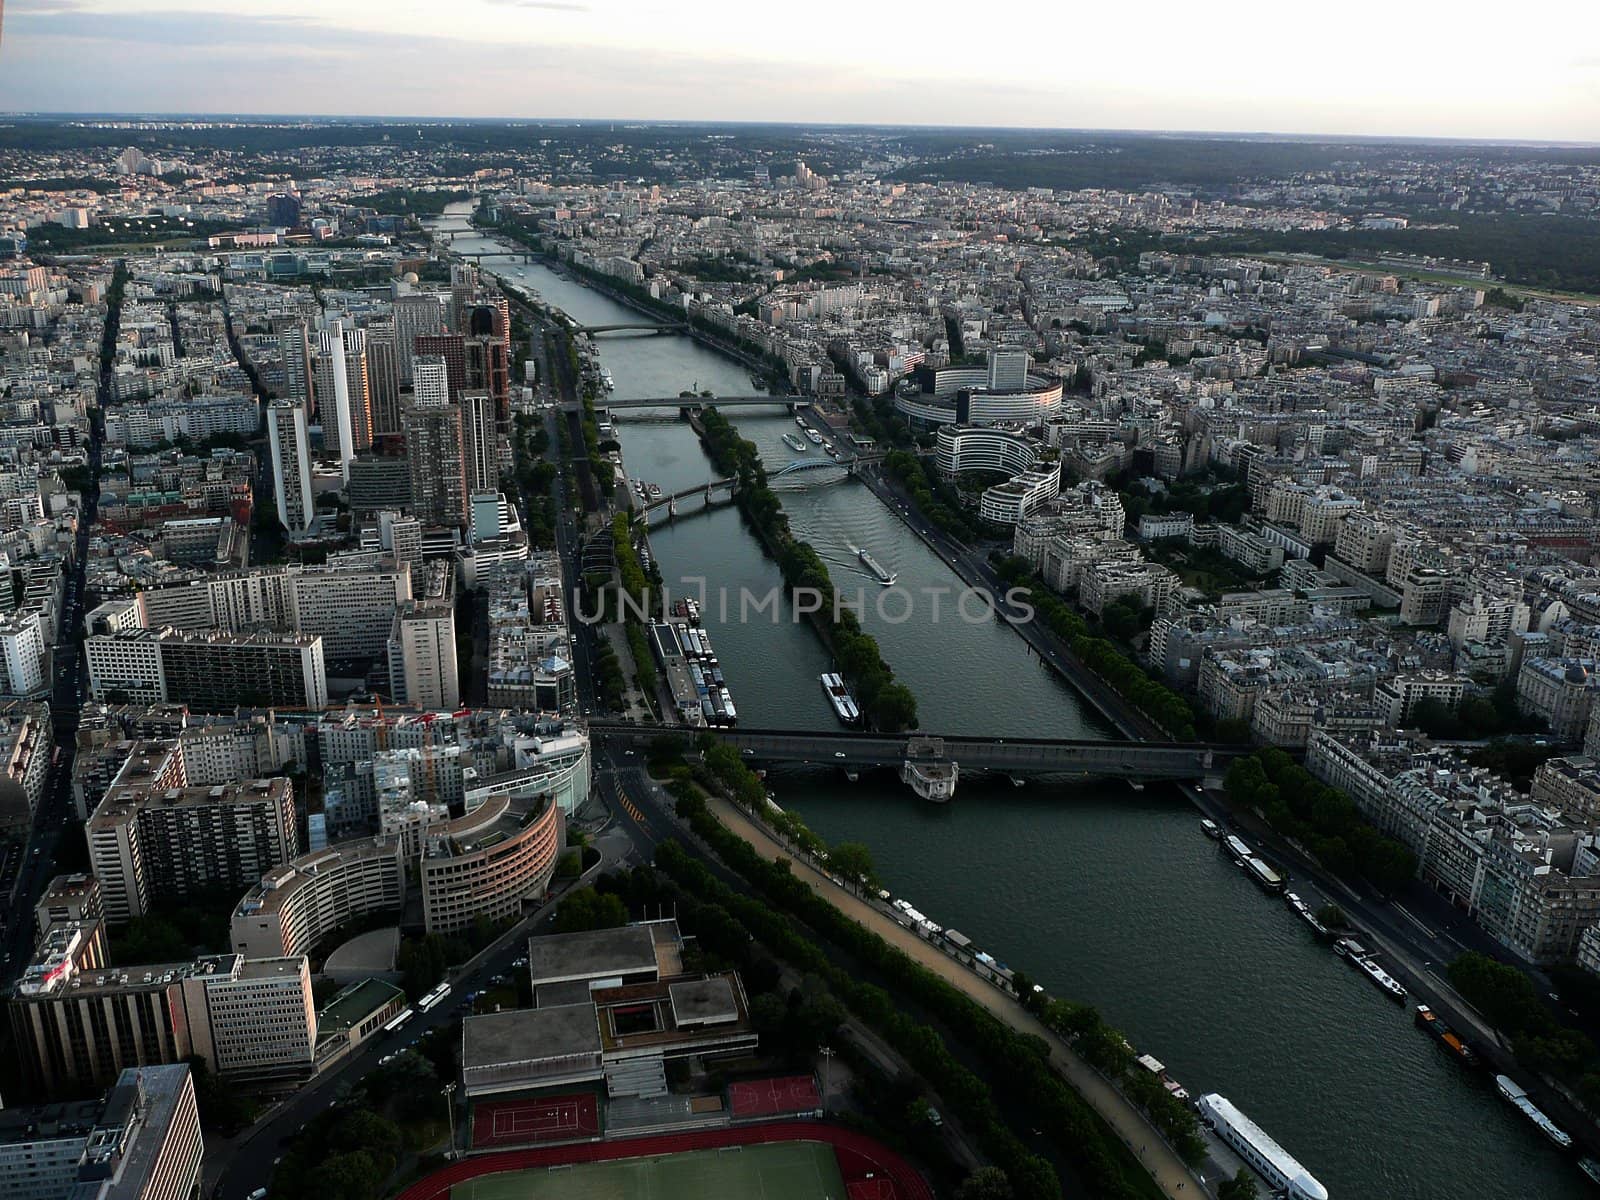 Panoramic View of Paris from Tour Eiffel, France by marcorubino